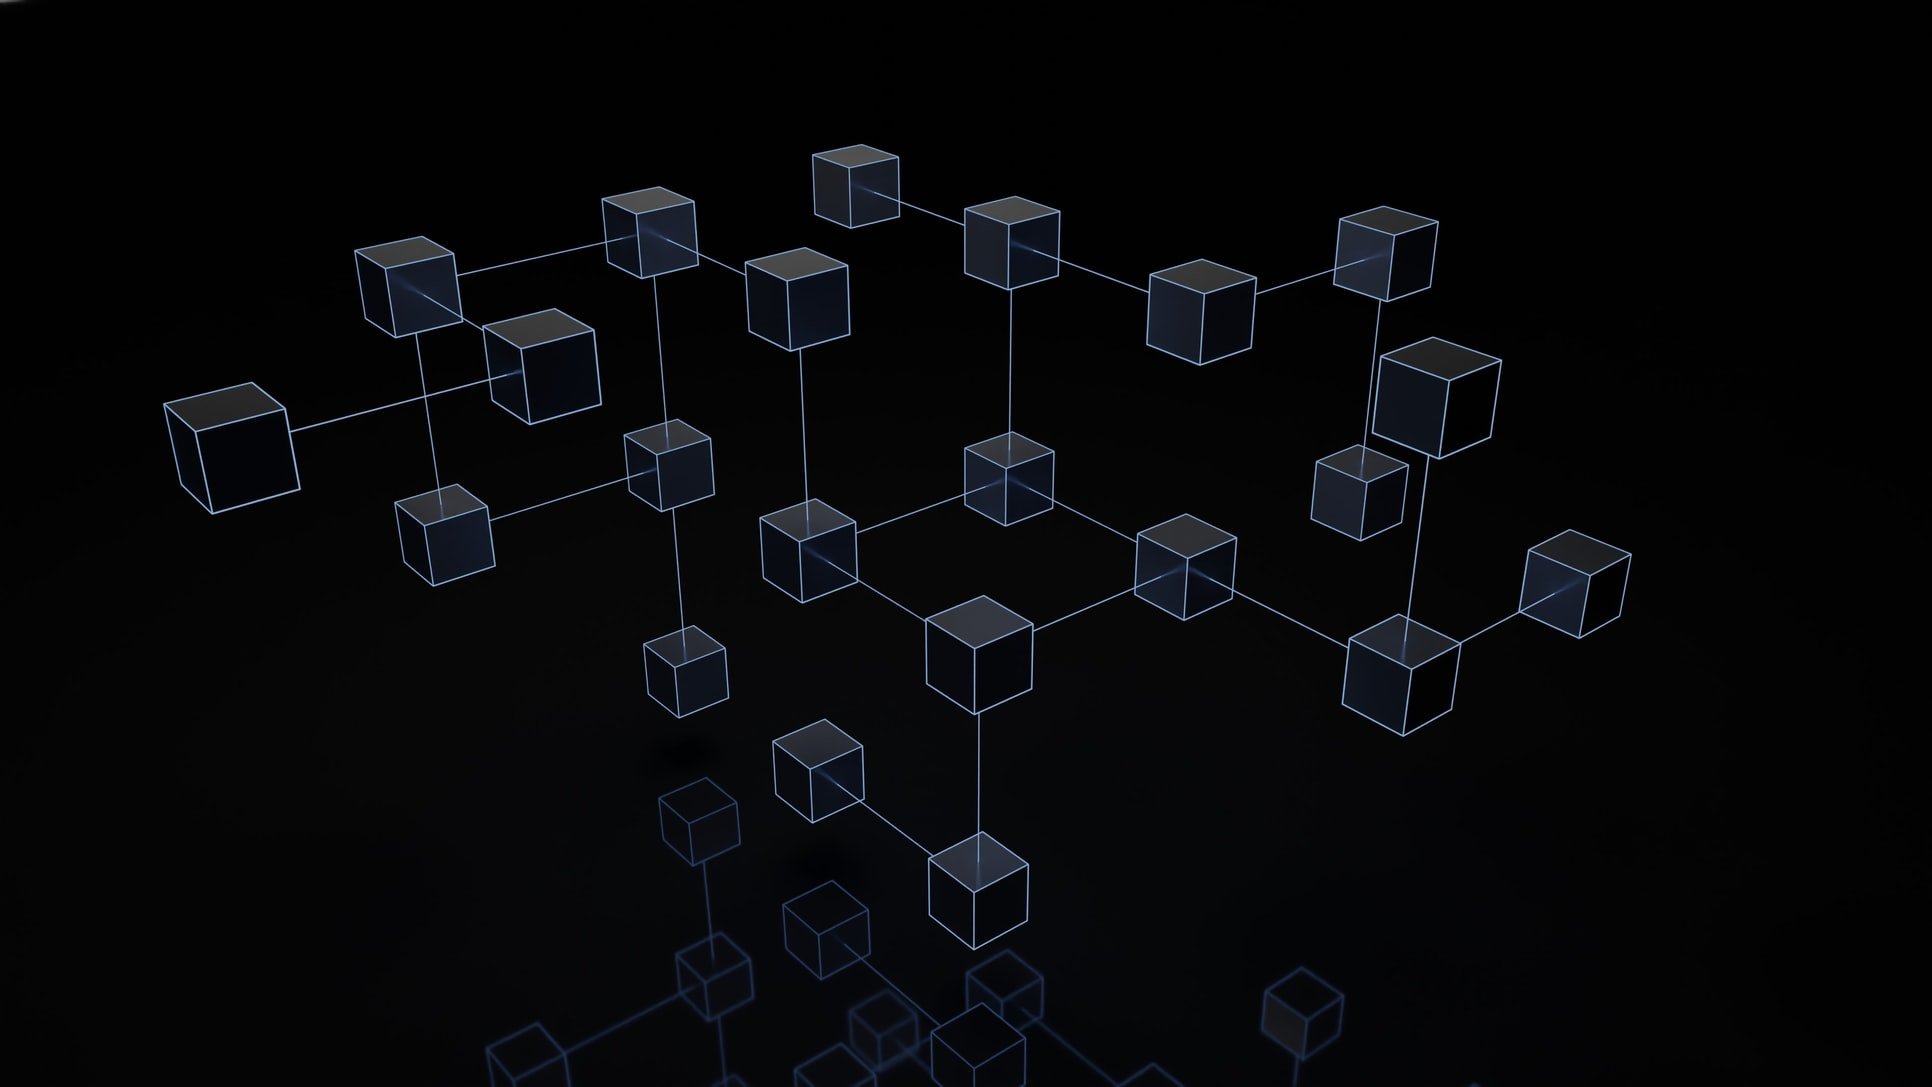 Cubes connected in a blockchain like link matrix on a black background